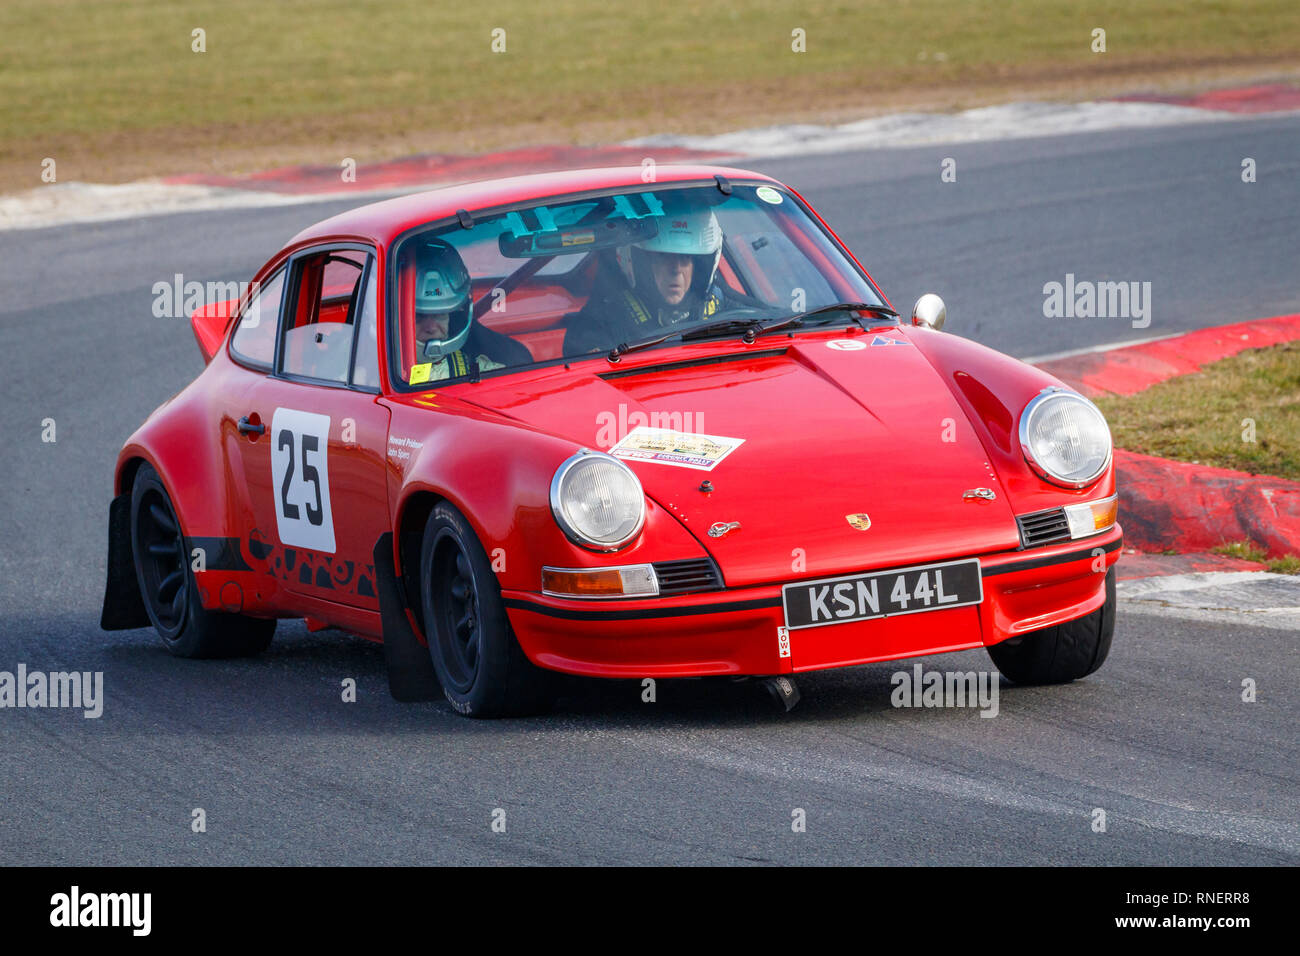 Porsche 911, KSN 44L, with driver John Spiers and co-driver Howard Pridmore during the 2019 Snetterton Stage Rally, Norfolk. Stock Photo